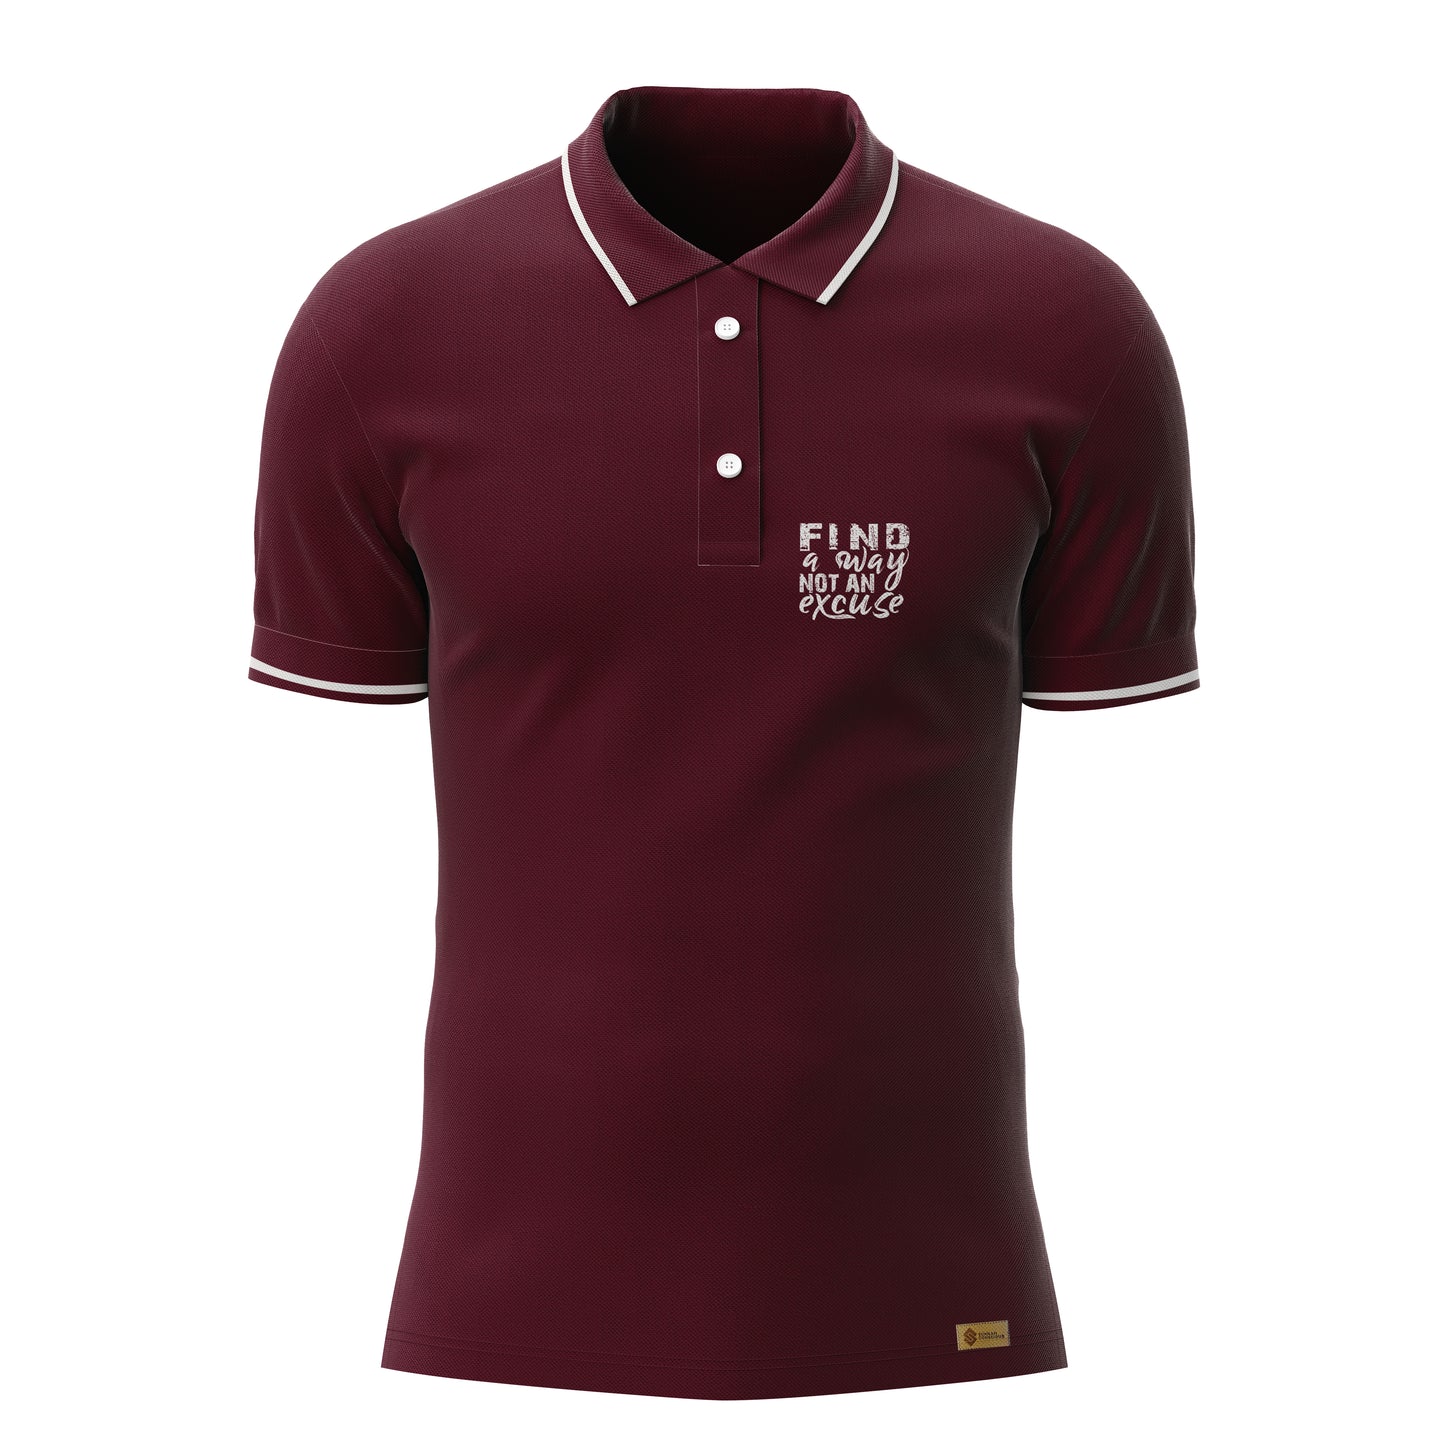 Find a Way Not an Excuse Polo Shirt